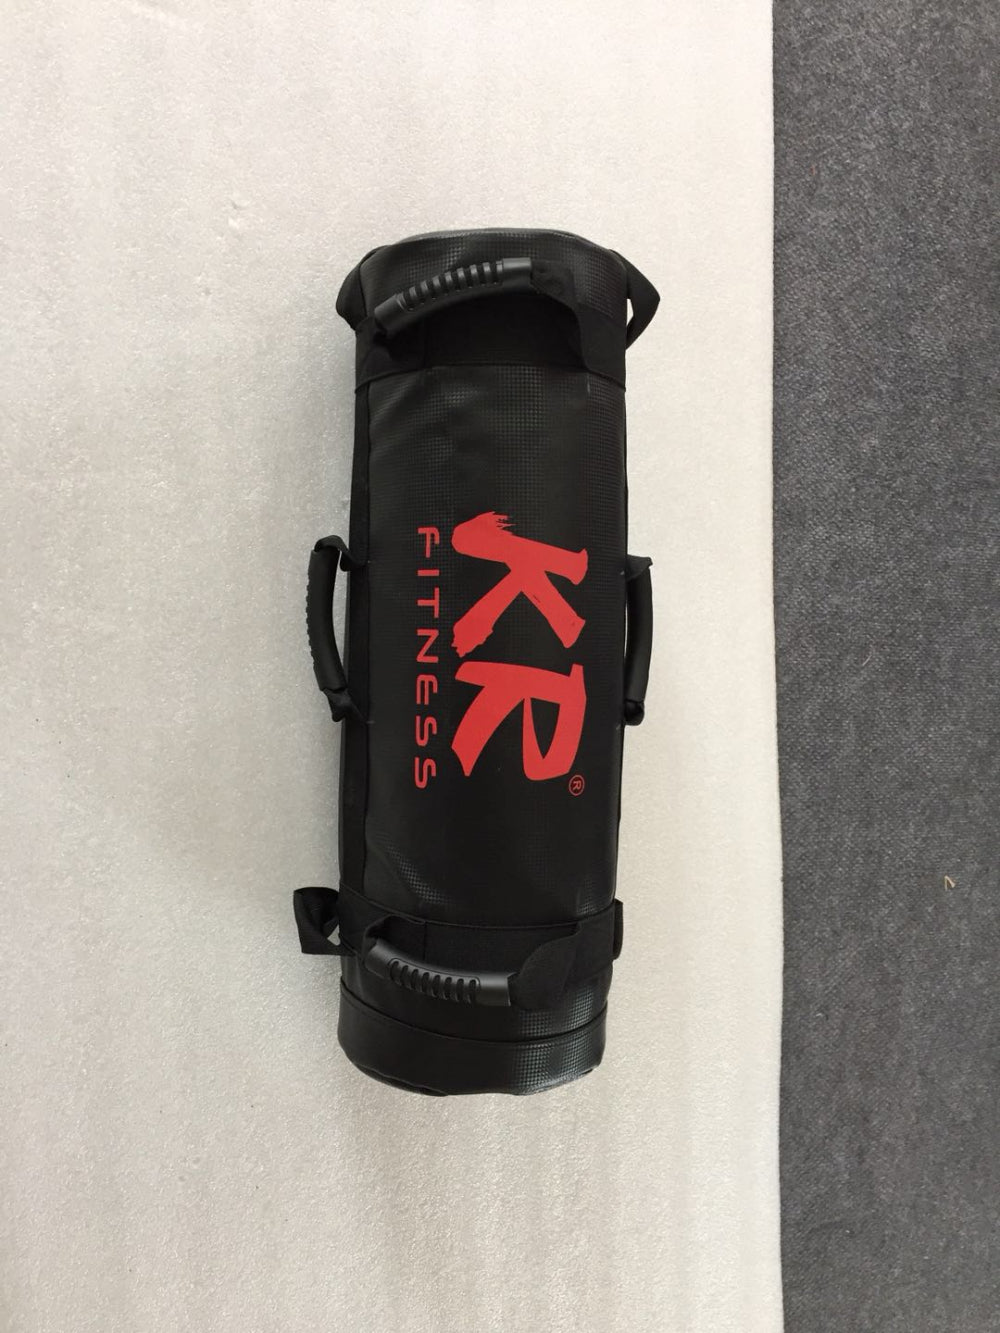 WILKYs0Power Explosive Weightlifting Bag
 Name: Fitness sandbag weight bag
 
 Style: Sports
 
 Material: Cotton


 Name: Fitness sandbag weight bag
 
 Style: Sports
 
 Material: Cotton  
 


 
 


 
 
 
 
